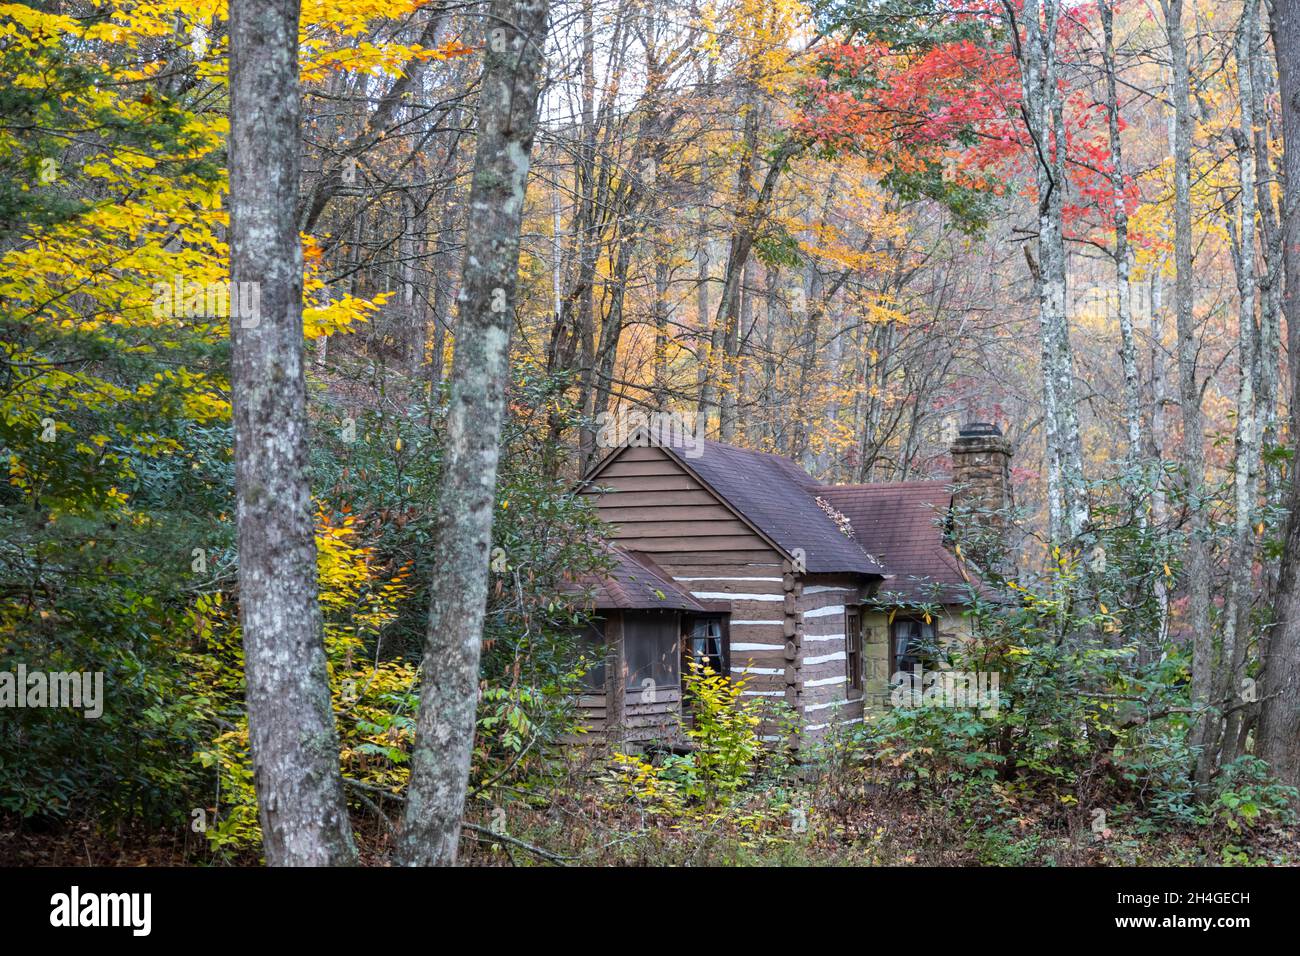 Marlinton, West Virginia - A cabin built in the 1930s by the Civilian Conservation Corps (CCC) in Watoga State Park. The CCC was a New Deal program in Stock Photo